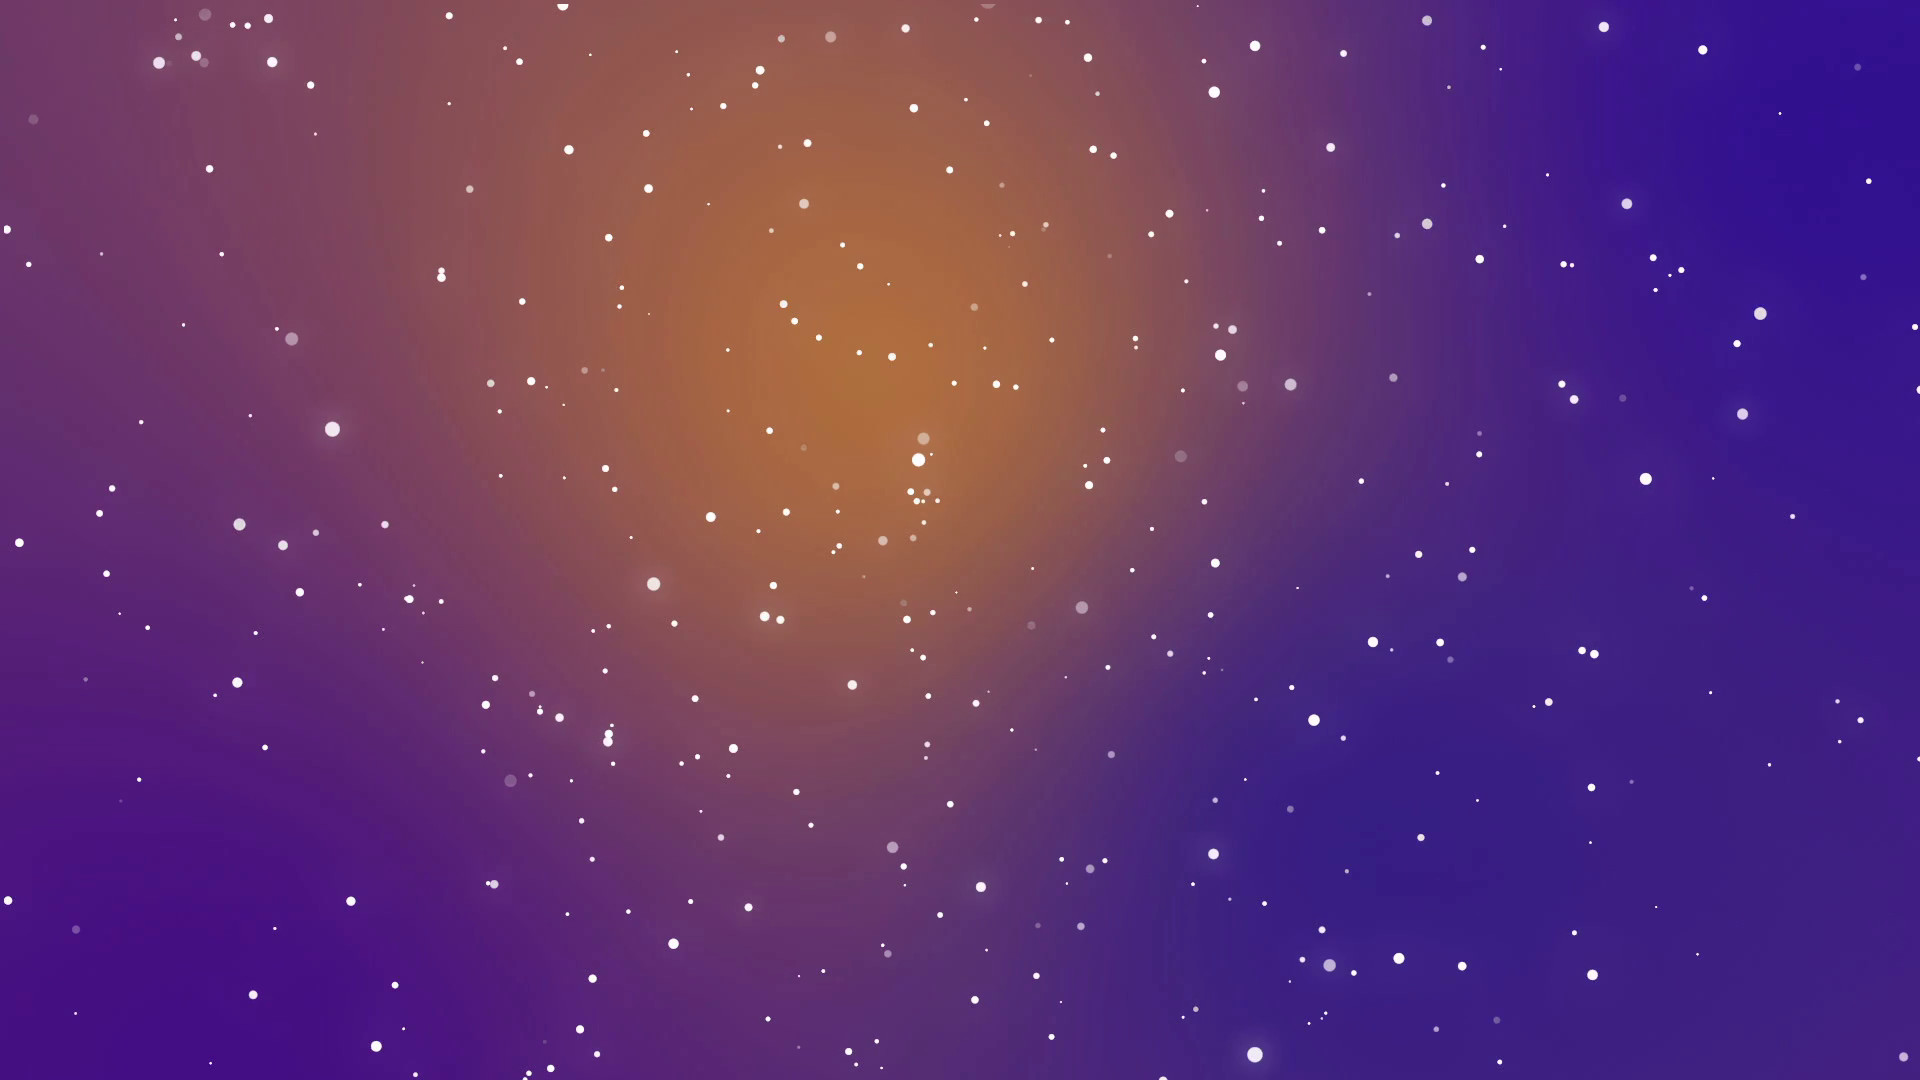 Galaxy Animation With Shining Light Particle Stars On Colorful Purple Orange Gradient Background Motion Background Storyblocks Video 1920x1080